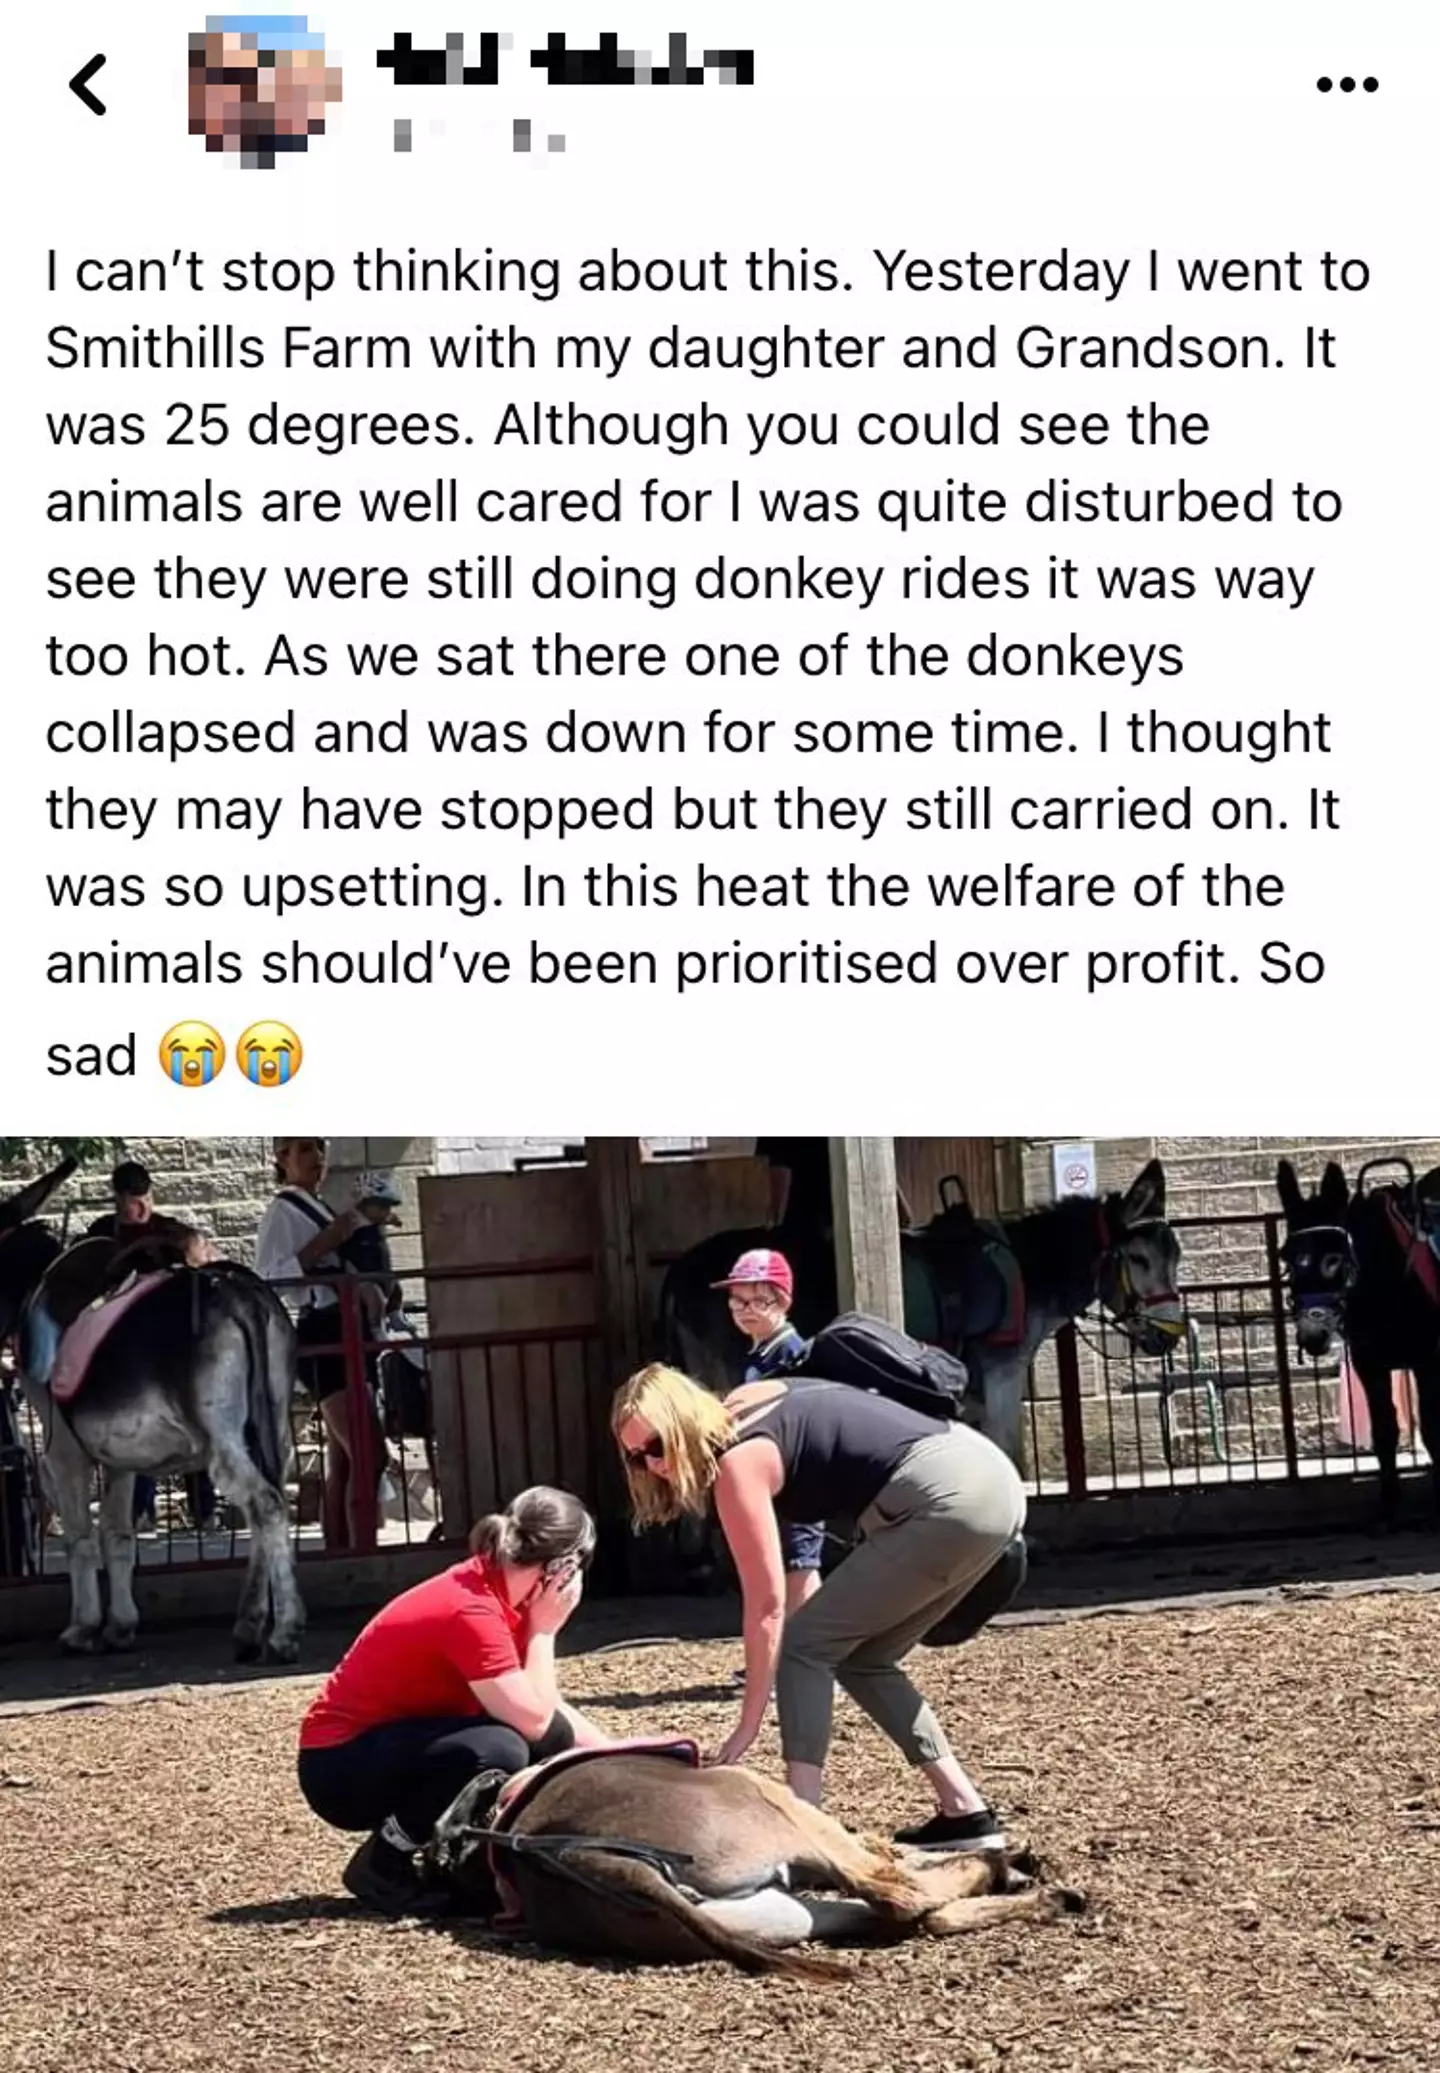 The original Facebook post claiming the donkey had collapsed due to the heat.